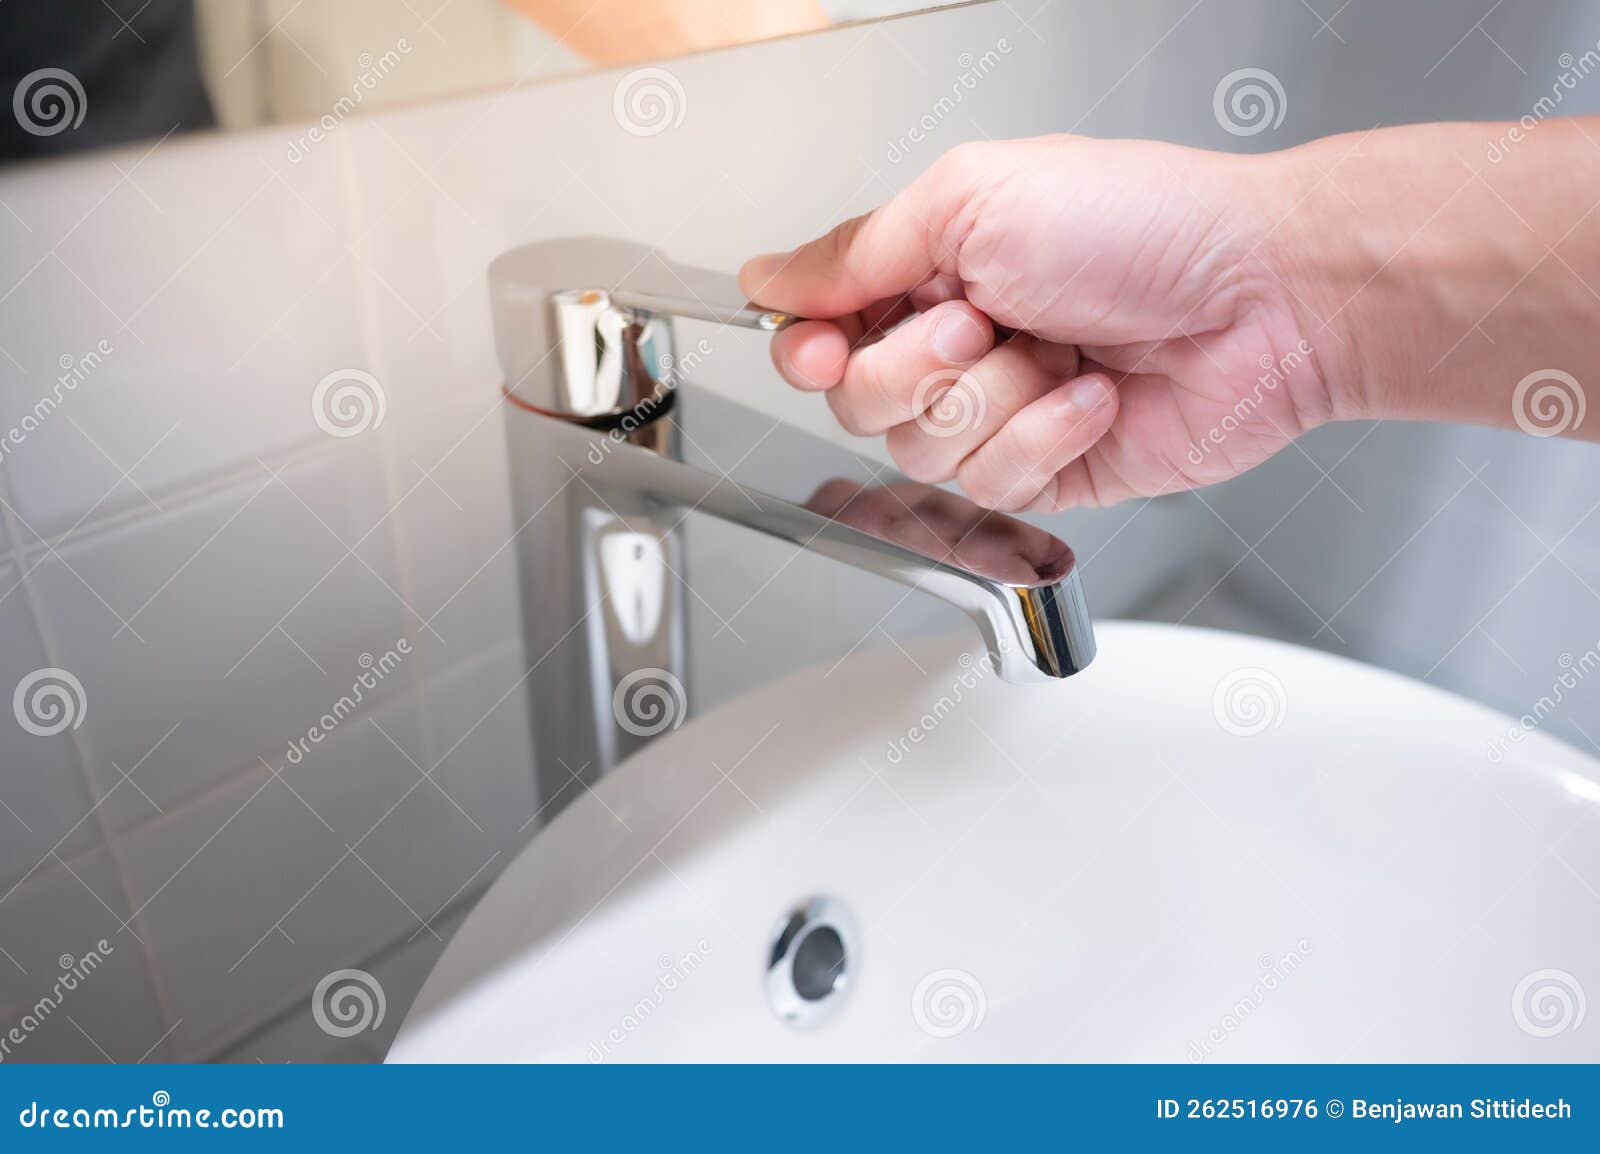 male hand closing water tap in bathroom